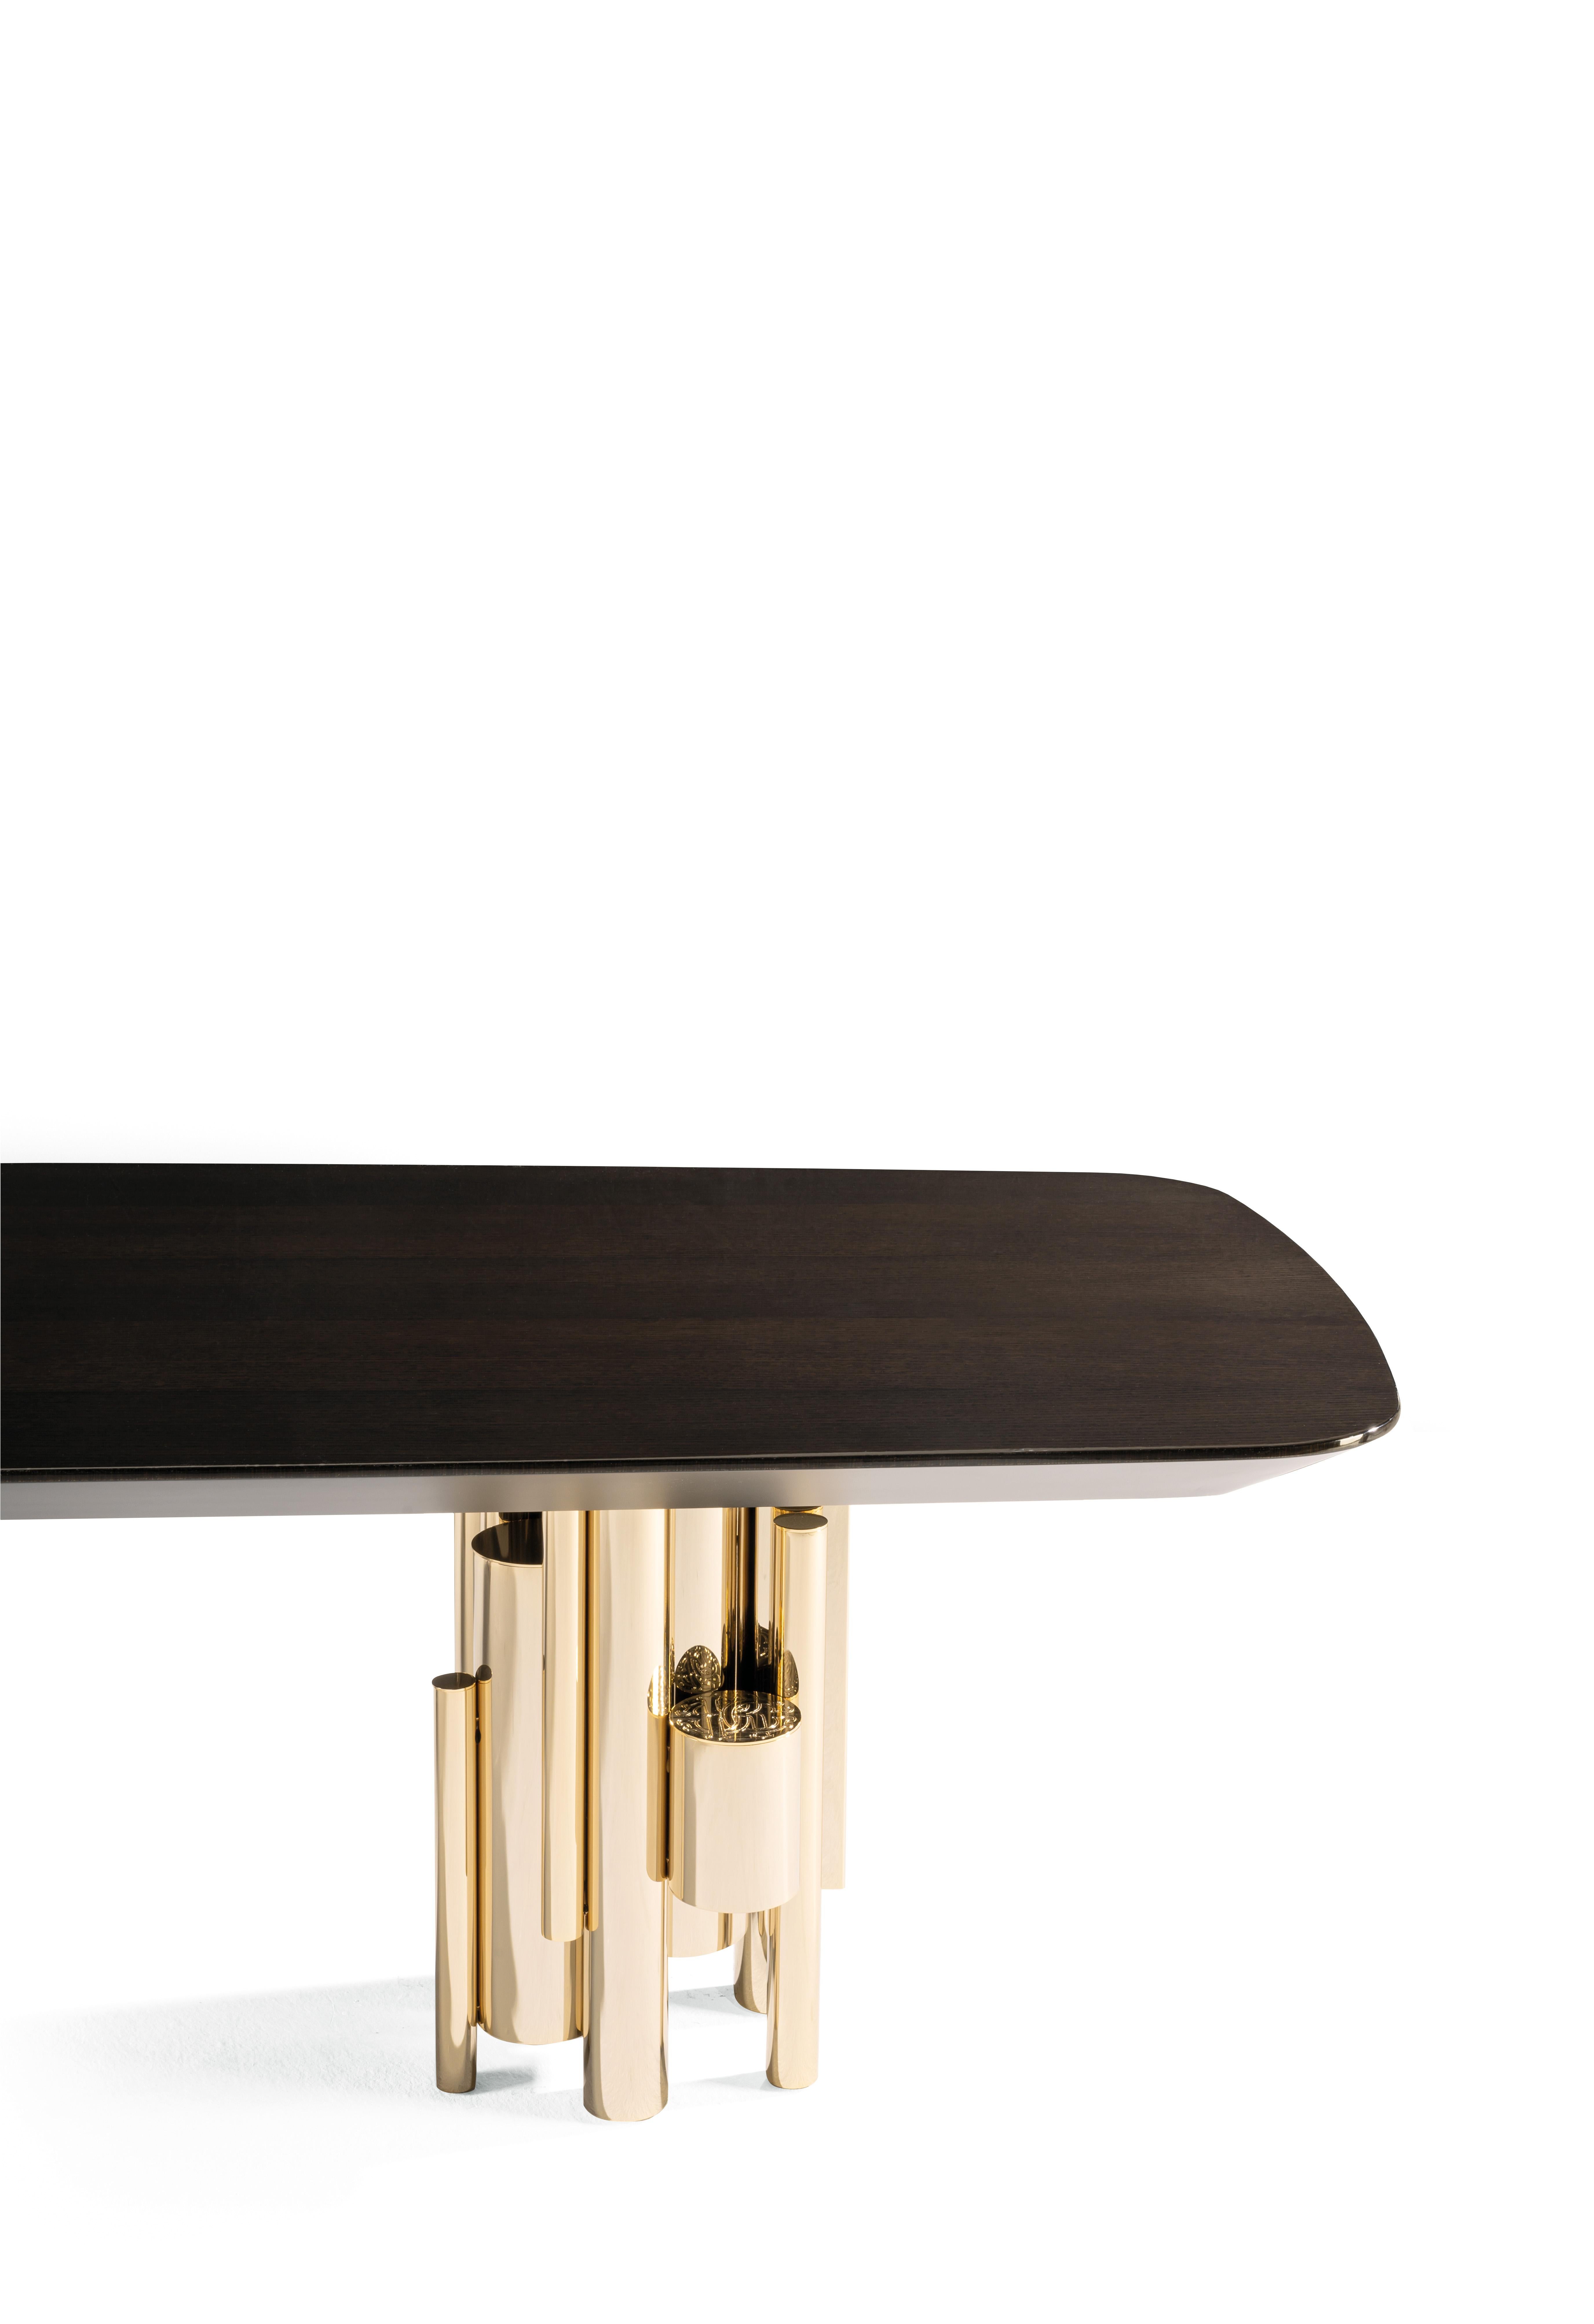 Contemporary 21st Century Antigua Dining Table in Carbalho by Roberto Cavalli Home Interiors For Sale